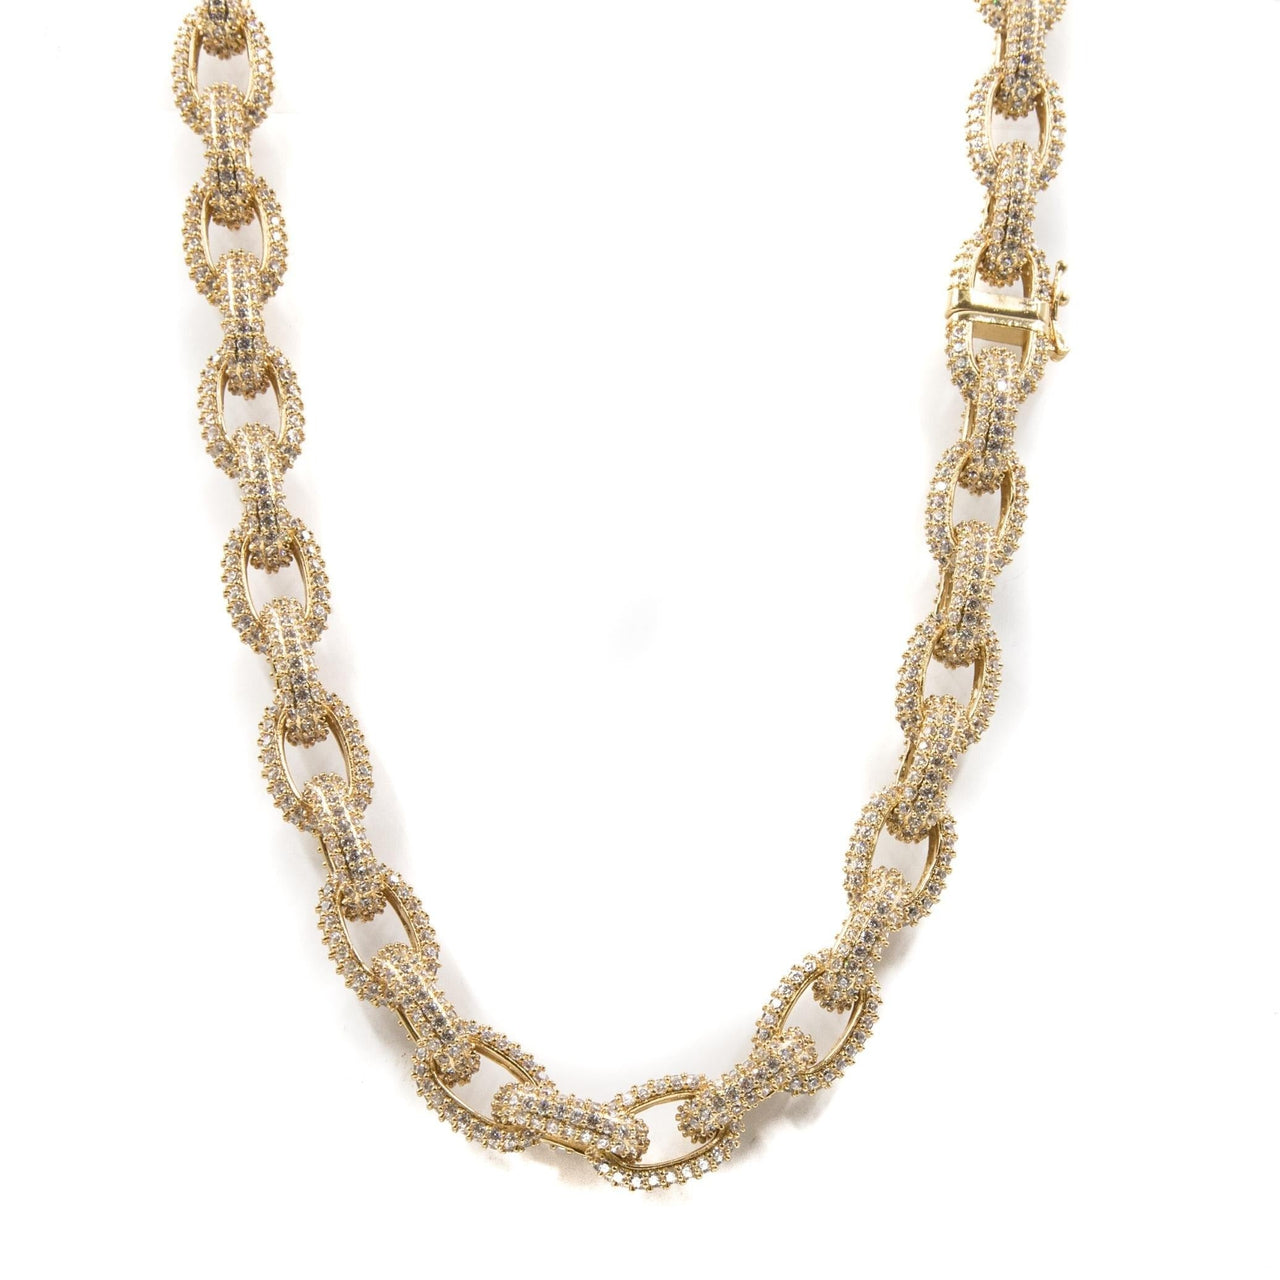 GOLDEN GILT | CHAIN LINK NECKLACE | 18K GOLD PLATED | 20"